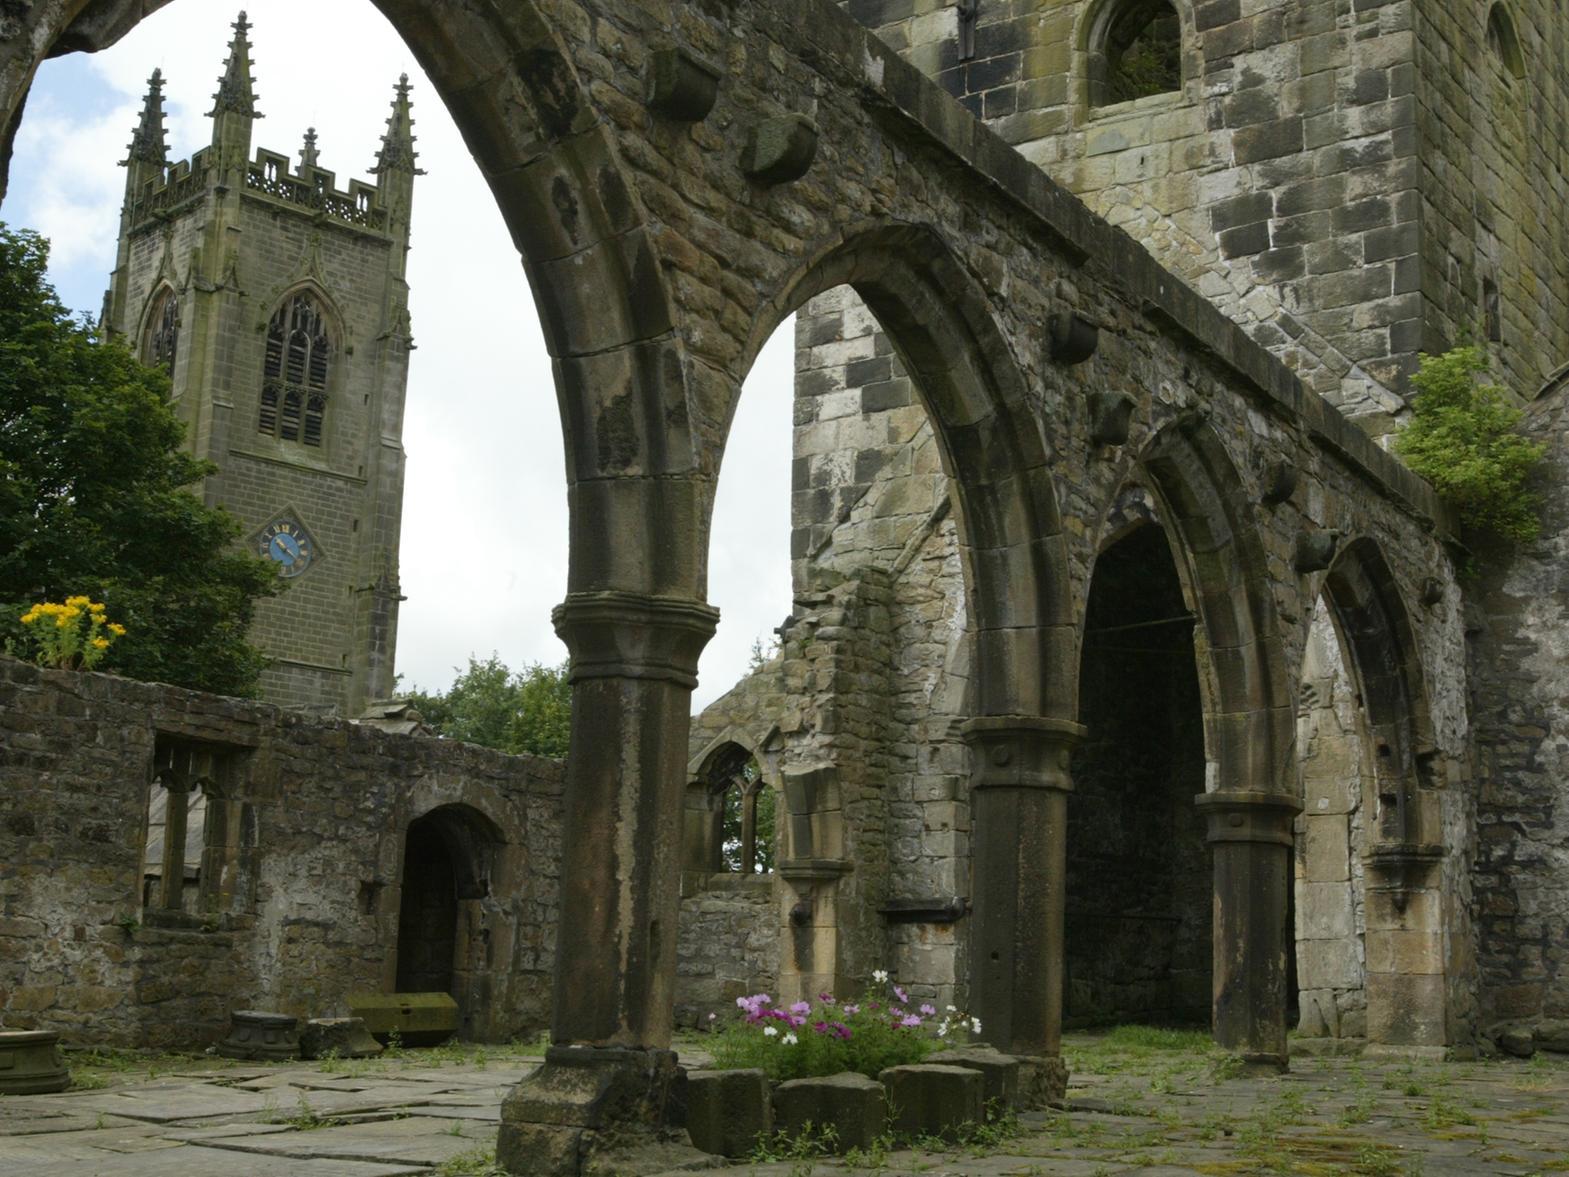 A beautiful scenic village above Hebden Bridge, Heptonstall is named on TripAdvisors as one of the most popular attractions according to users. Take in the wonderful scenery and pay a visit to the historic church of St Thomas a Becket.